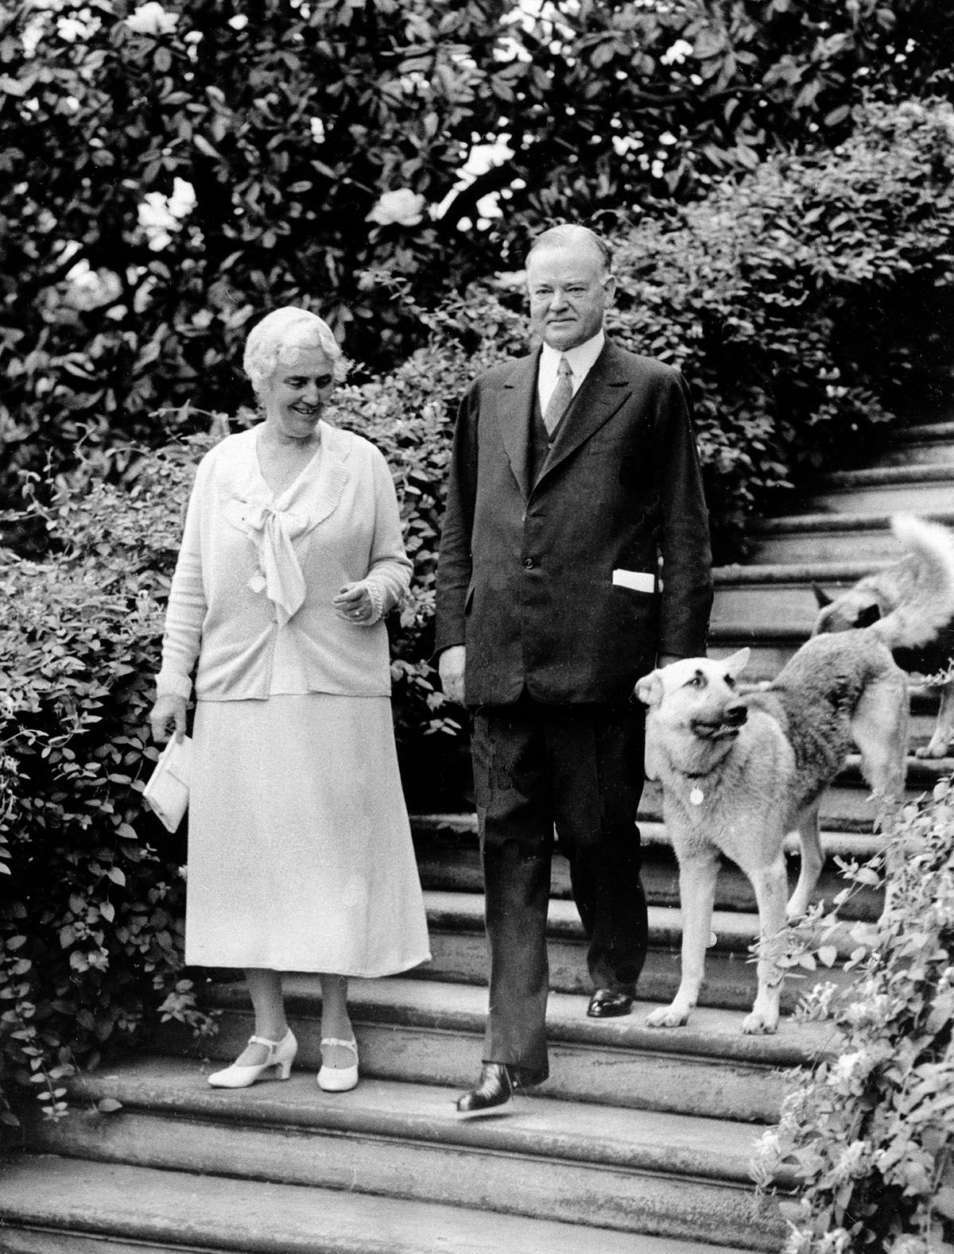 U.S. President Herbert Hoover, right, is shown with first lady Lou Henry Hoover and their dogs in Washington, D.C., on June 15, 1932, in the final year of his presidential term.  (AP Photo)